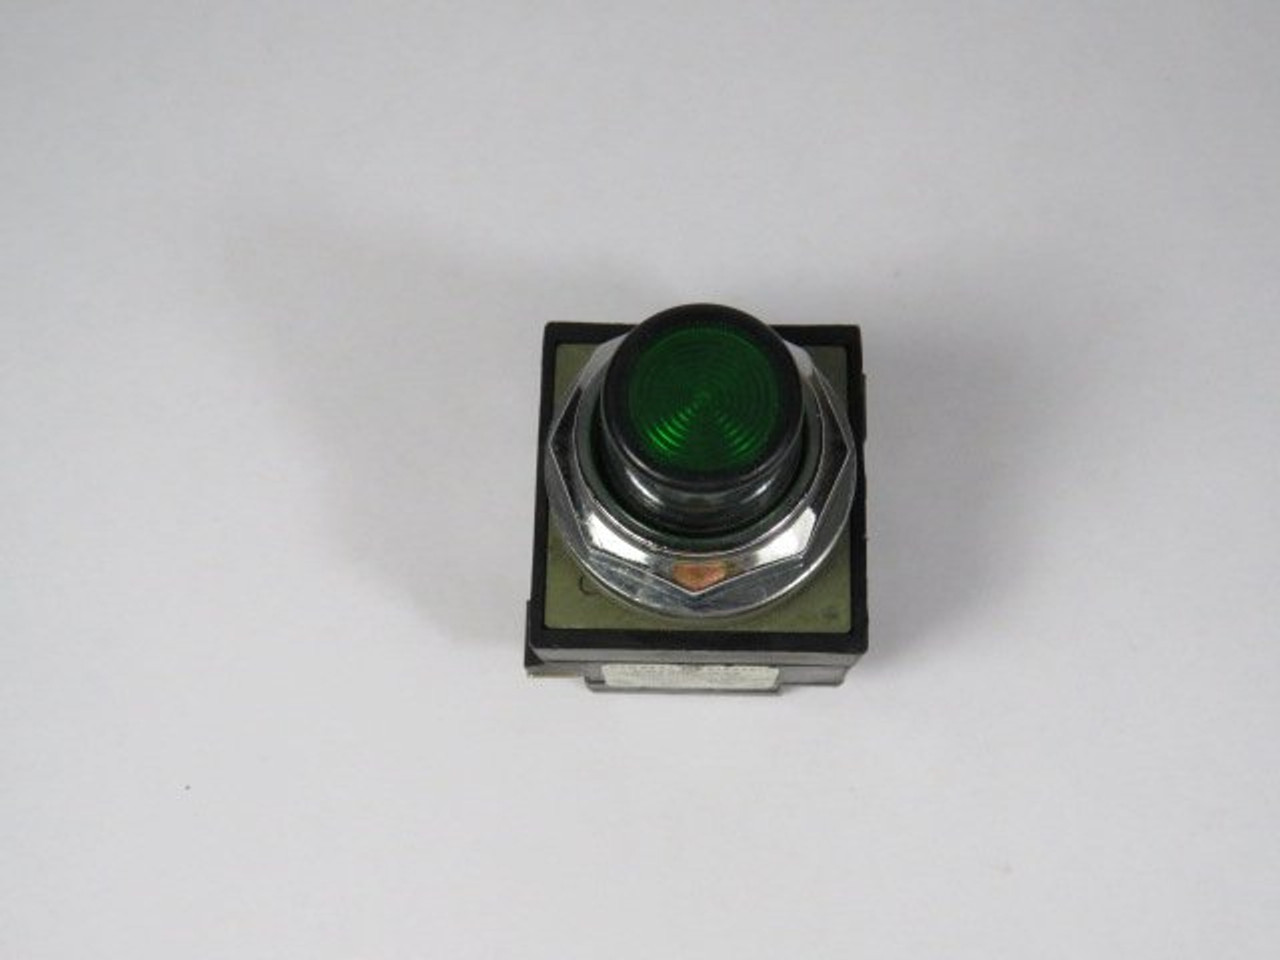 General Electric CR104PBT11G1S3 Green Push Button 240V/6V 60/50HZ USED